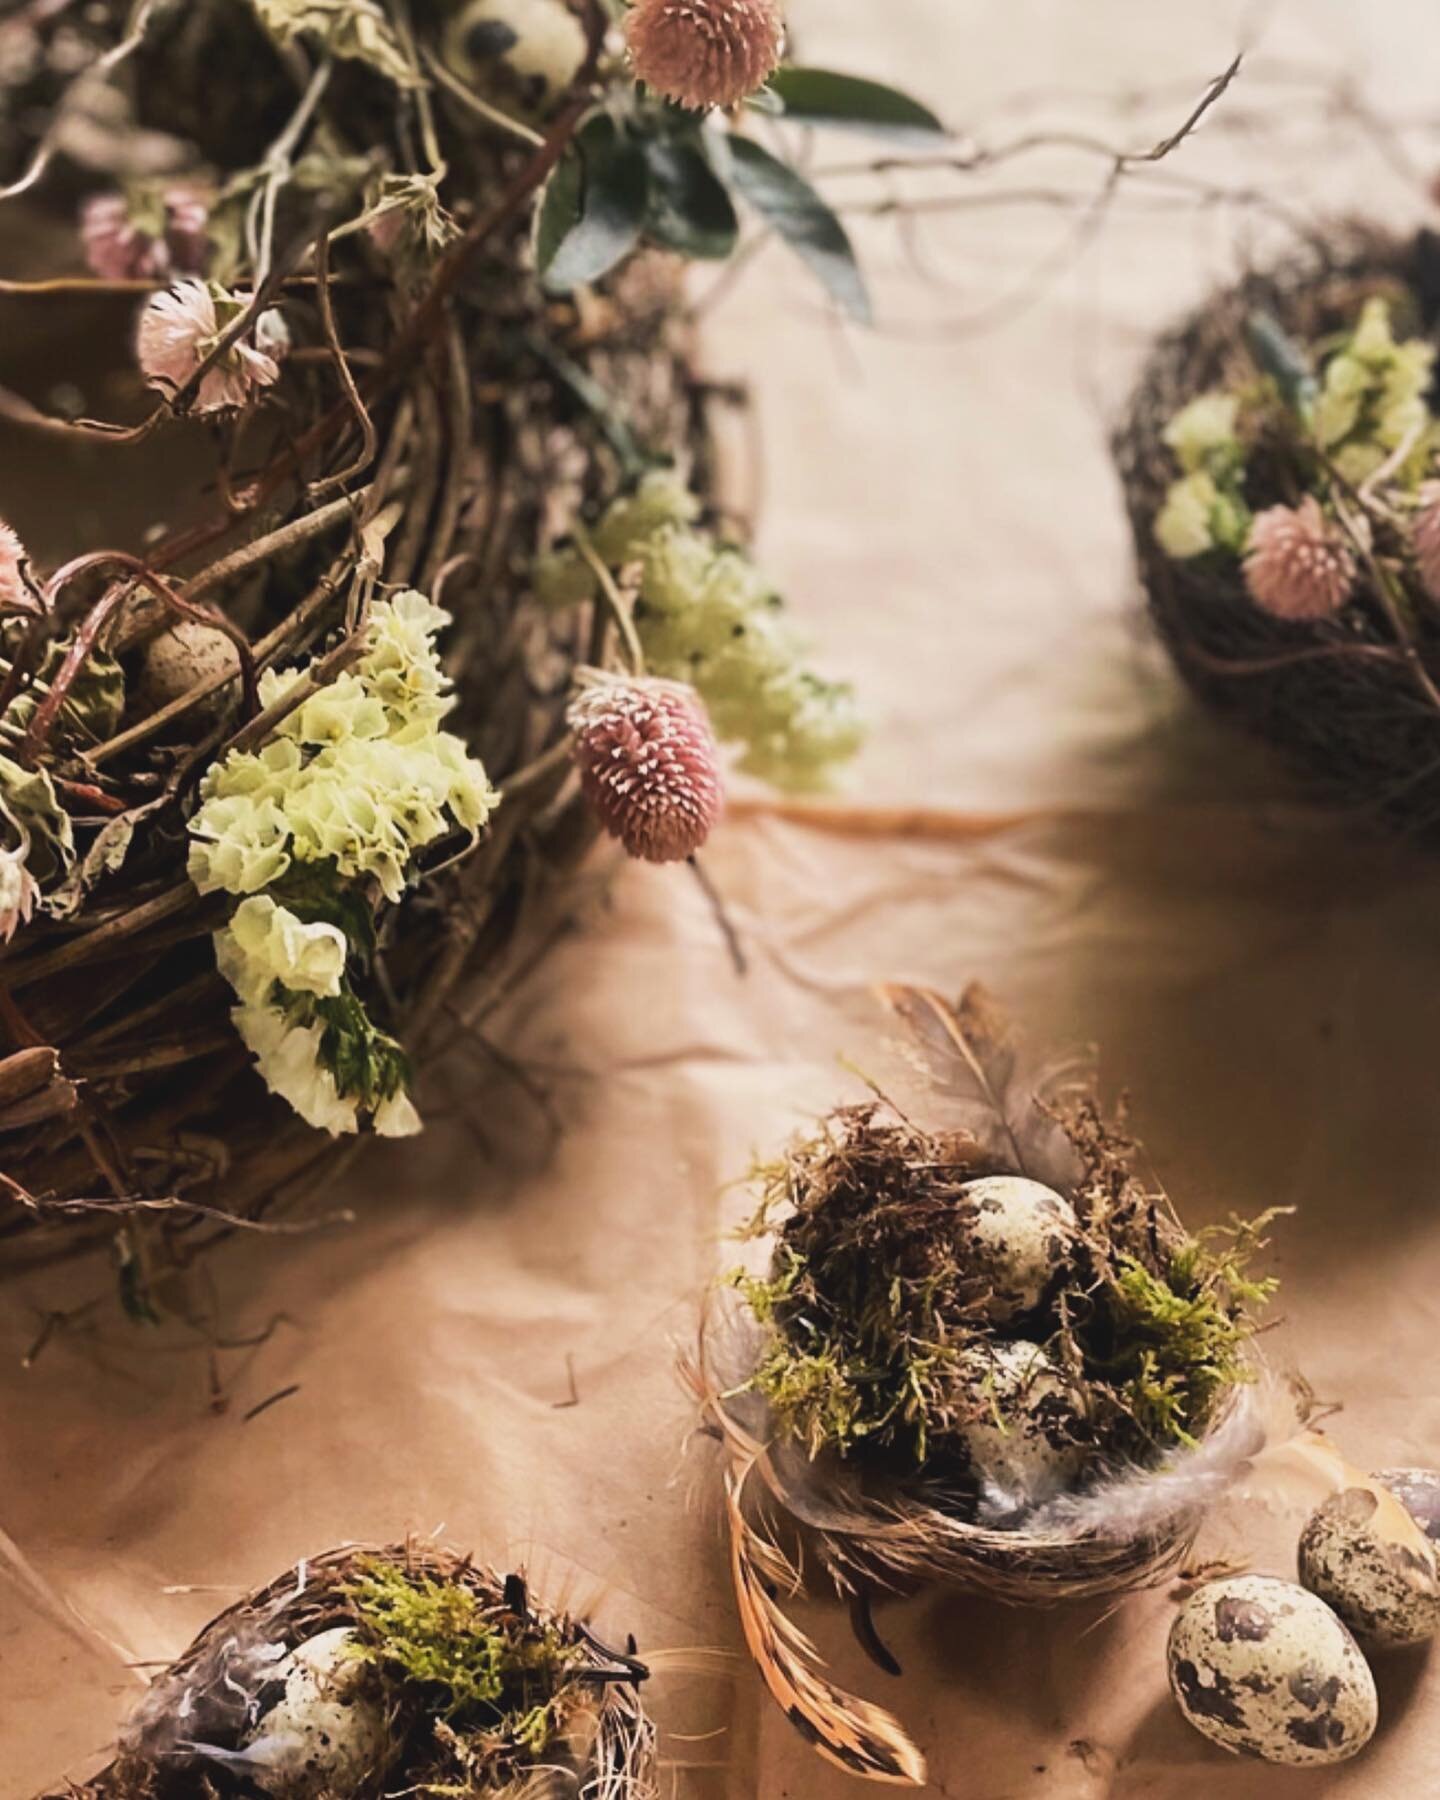 We cannot believe Easter is just a few weeks away! Our Easter boxes are now ready to order to be sent to you OR you can collect from @sullingtonmanor on Thursday 28th March #sullingtonmanor #sullingtonmanorfarm #sussexflorist #sussexflowers #easterfl